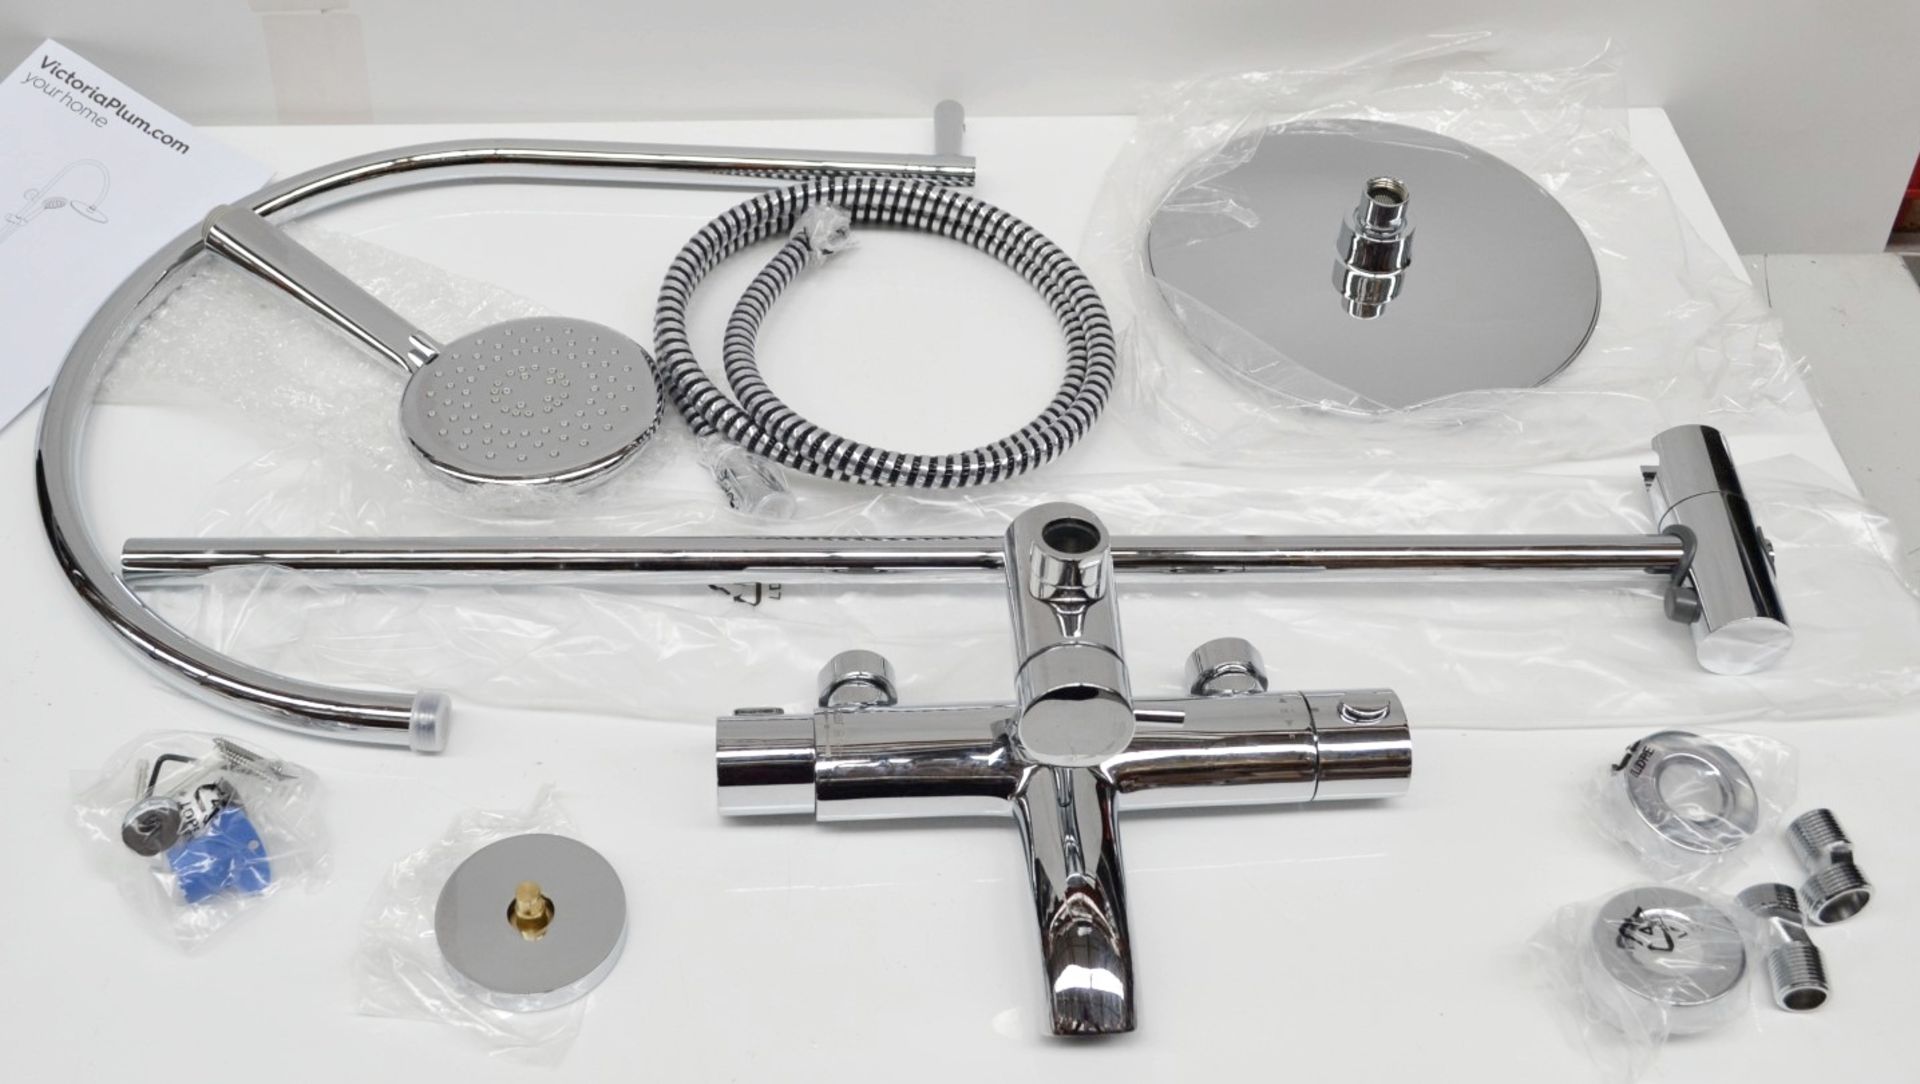 1 x OVAL Round Shower Riser System With Taps - Ref: MBI020 - CL190 - Unused Boxed Stock - - Image 4 of 11